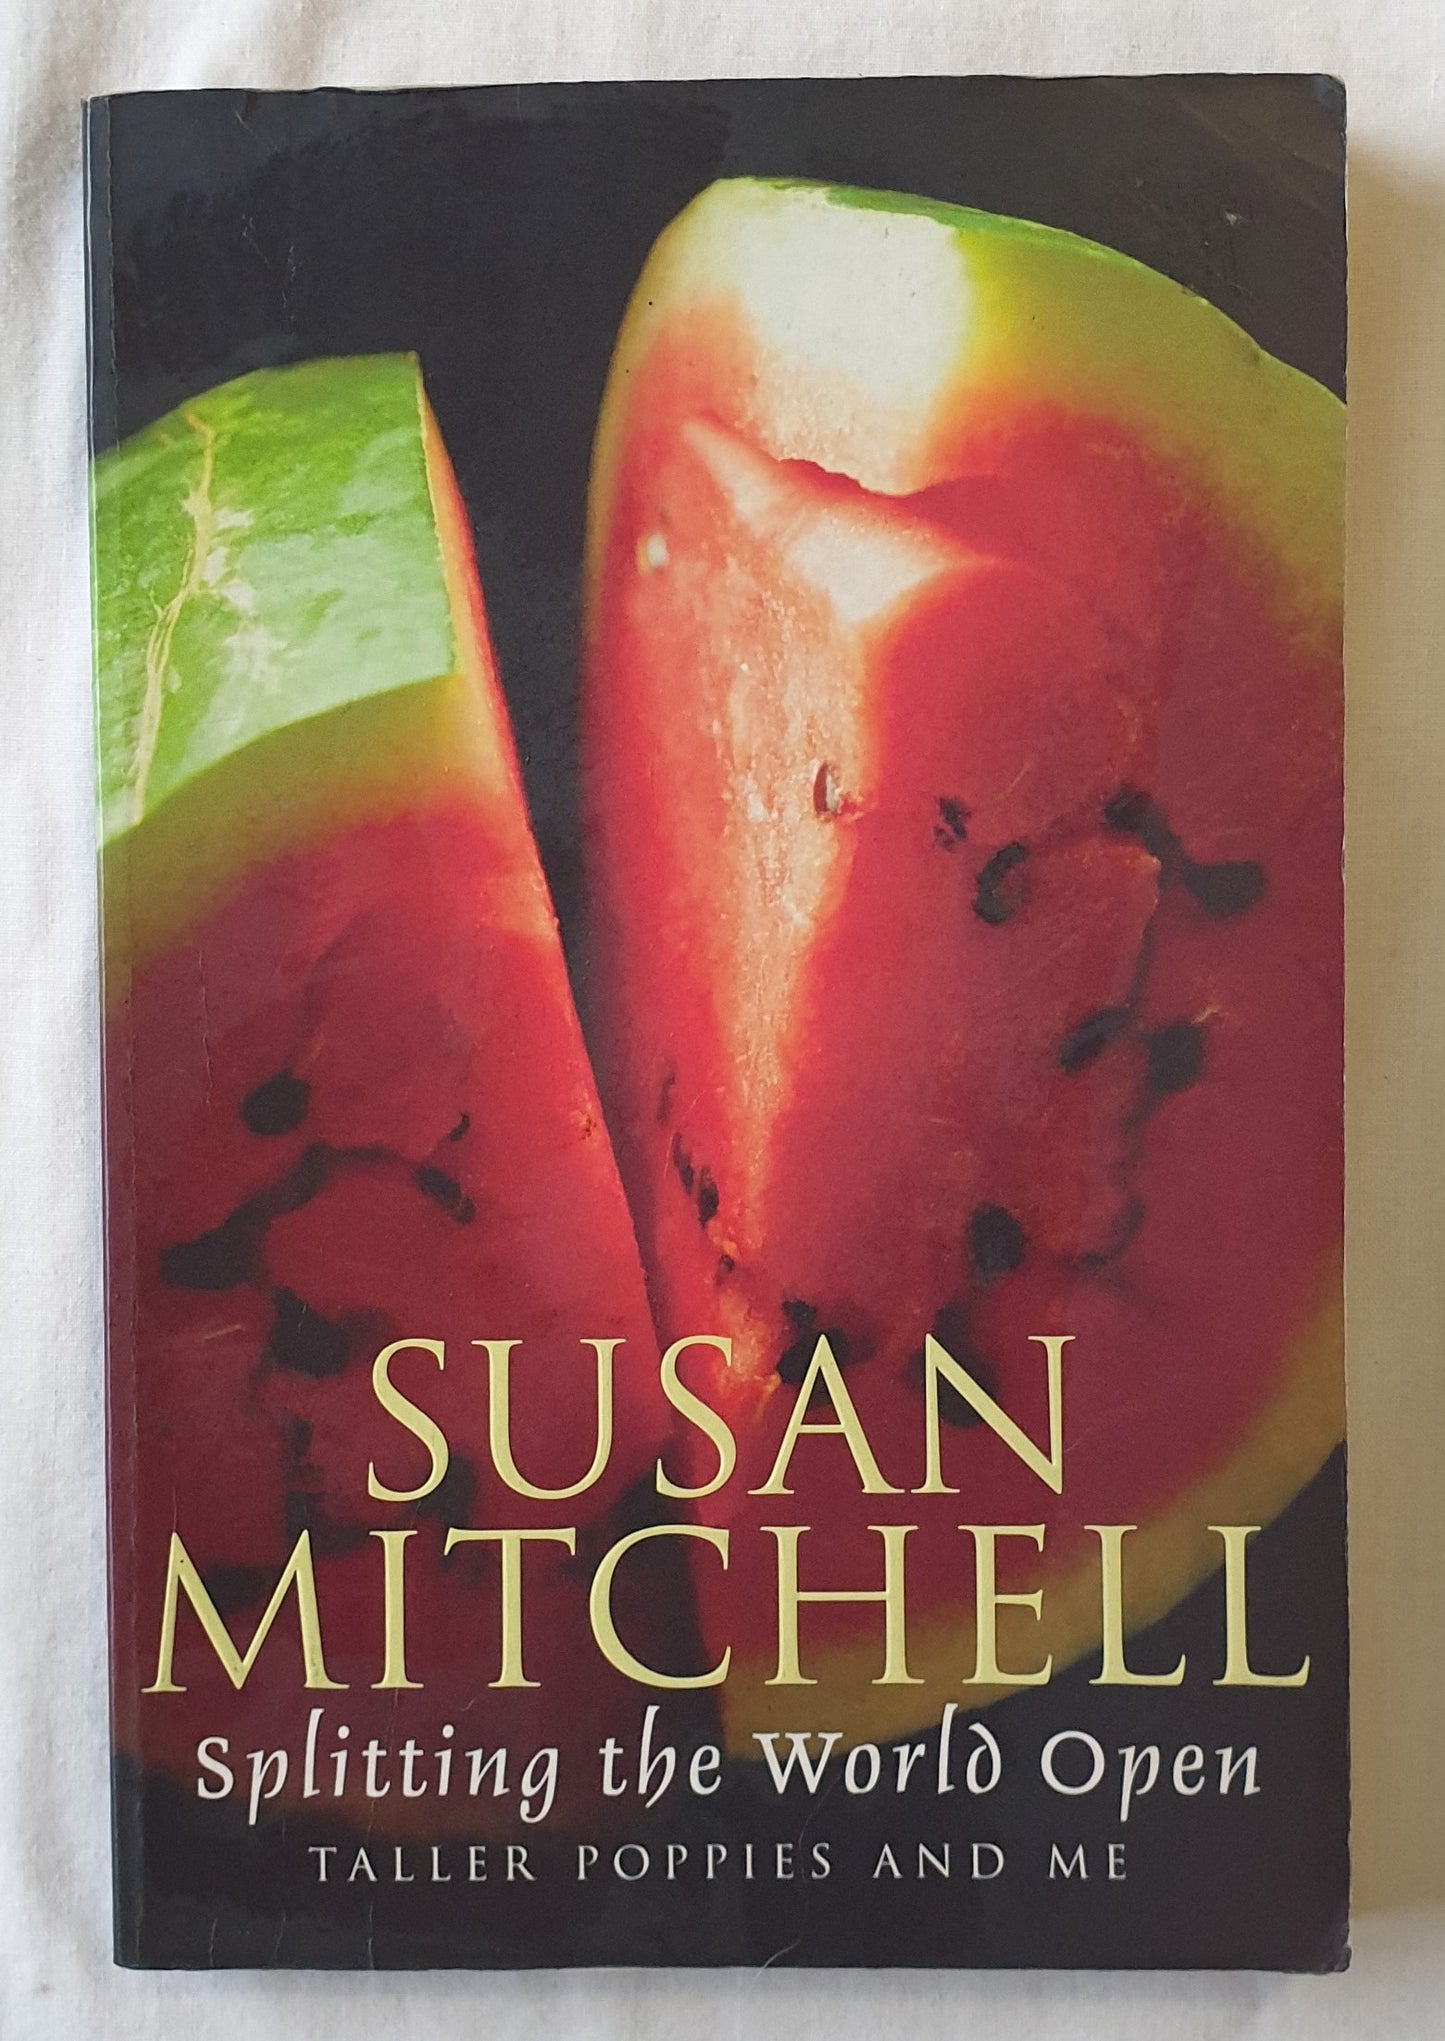 Splitting the World Open by Susan Mitchell